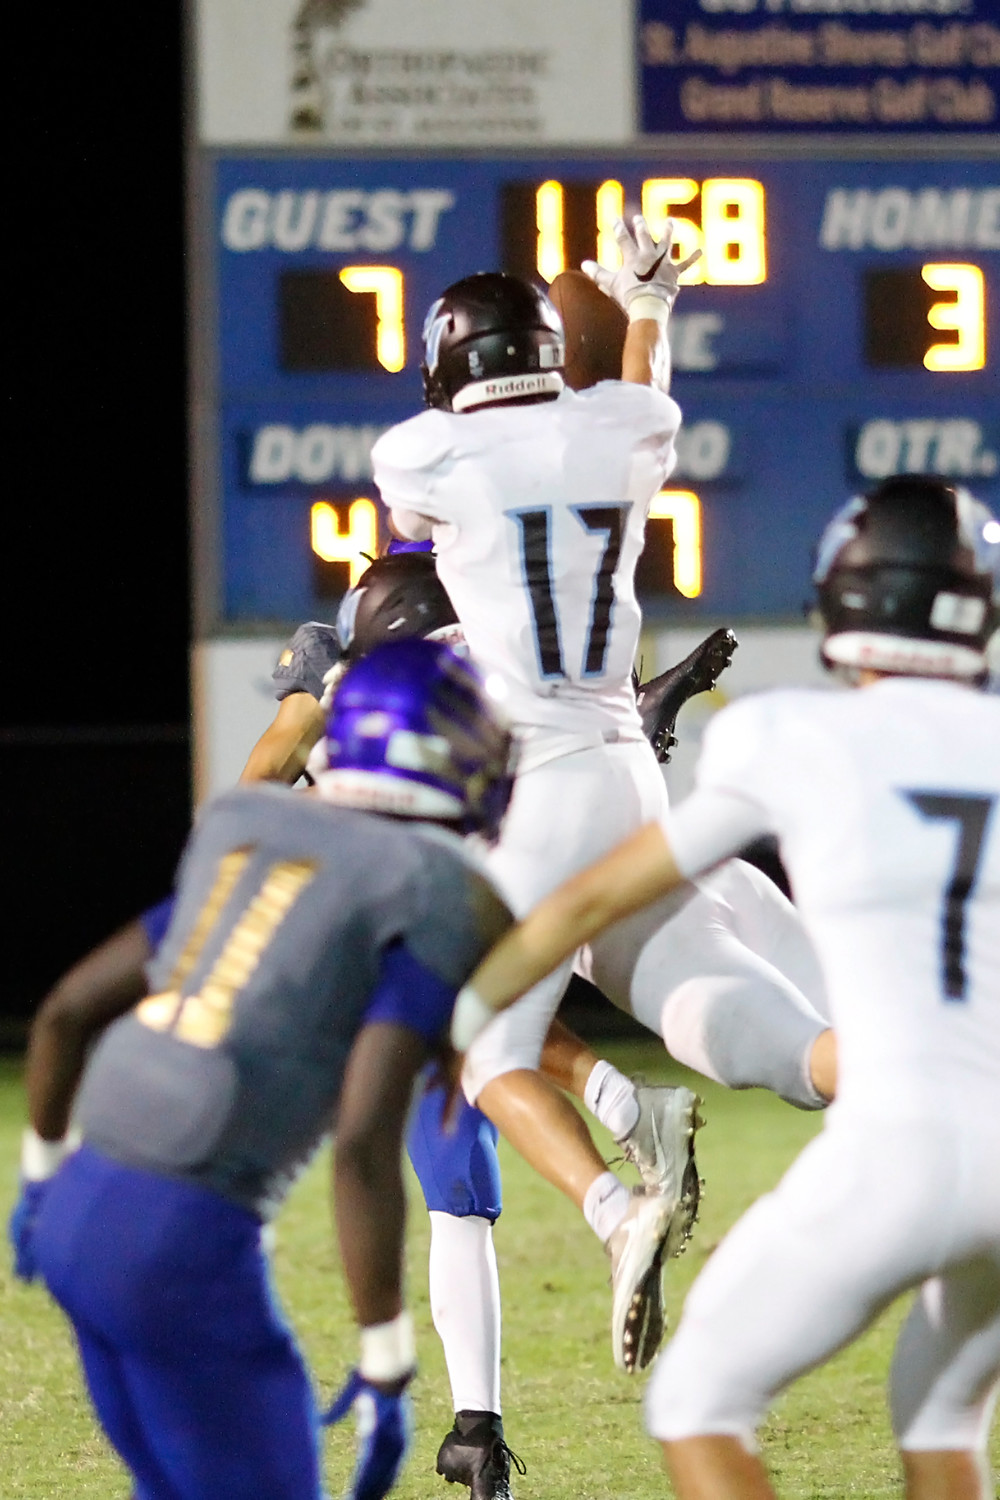 Tommy Zitiello blocks a Pedro punt. Wes Davis recovered the loose ball and returned it for a Ponte Vedra touchdown.